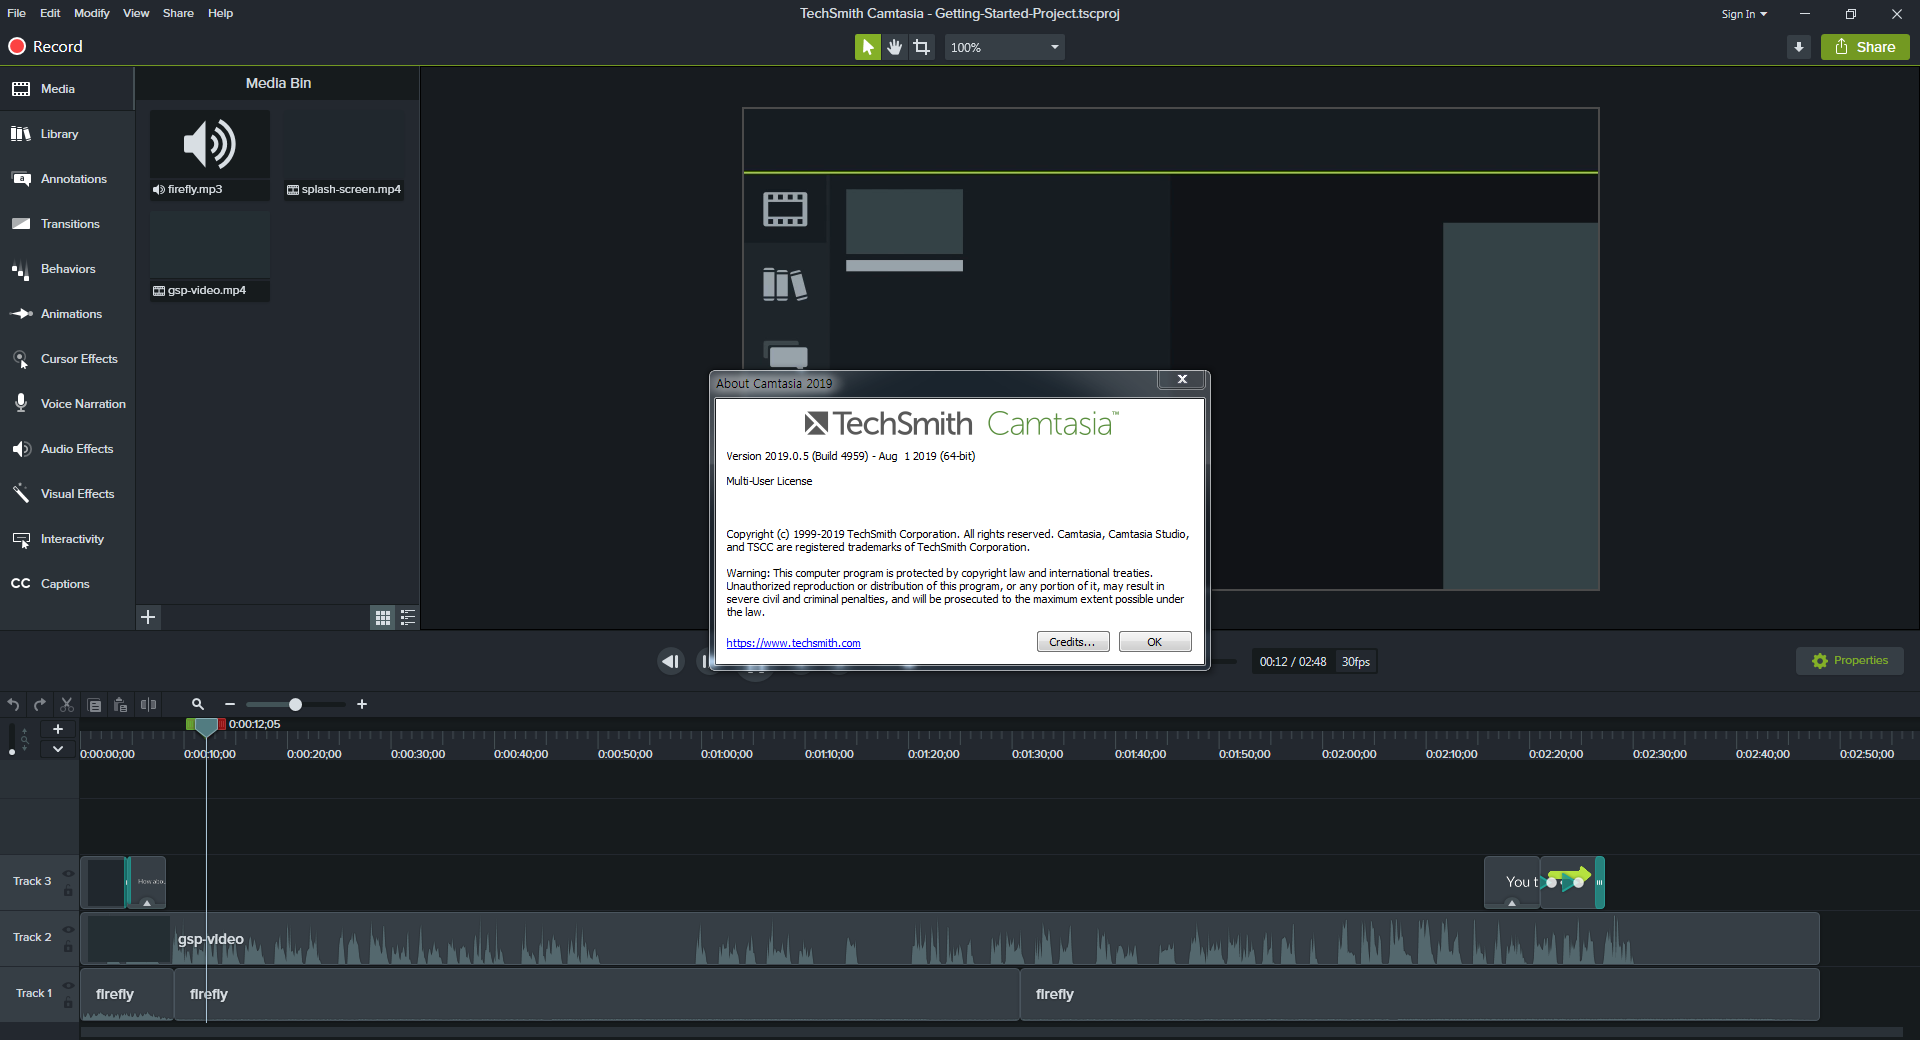 download the new for windows TechSmith Camtasia 23.2.0.47710